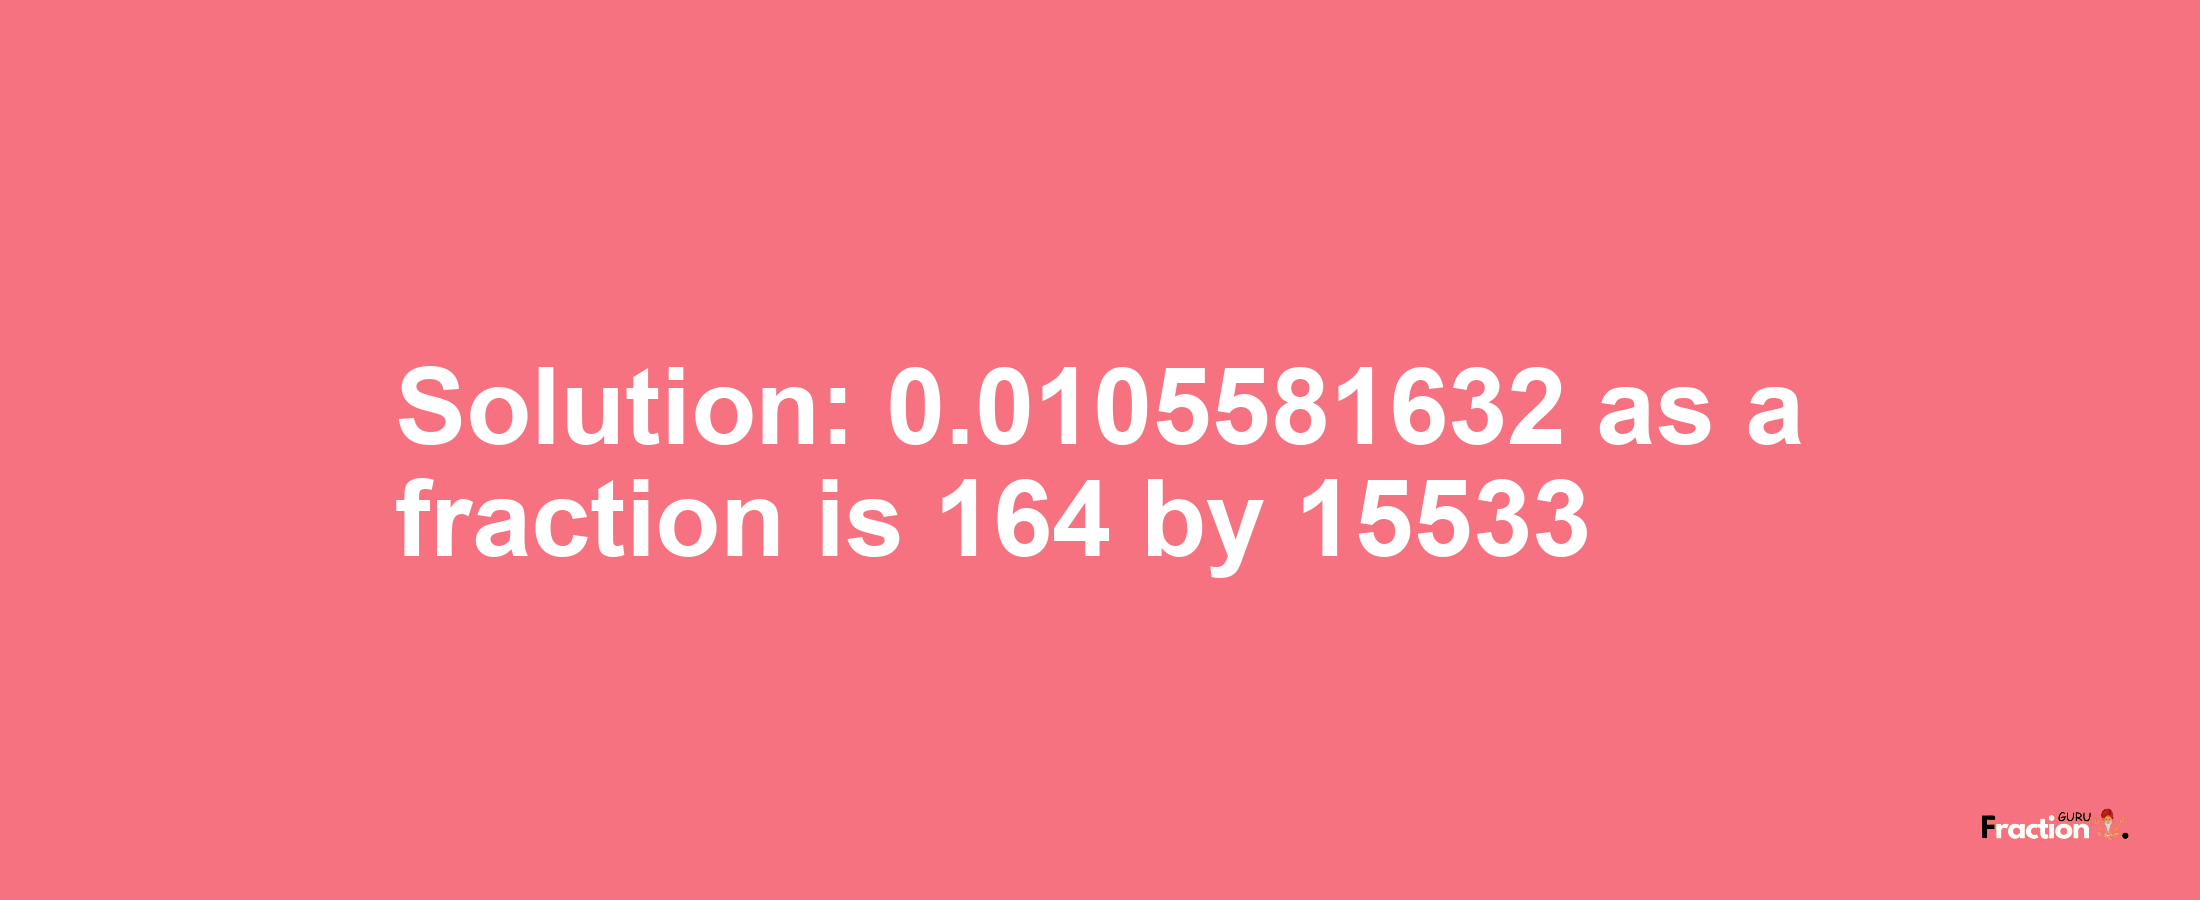 Solution:0.0105581632 as a fraction is 164/15533